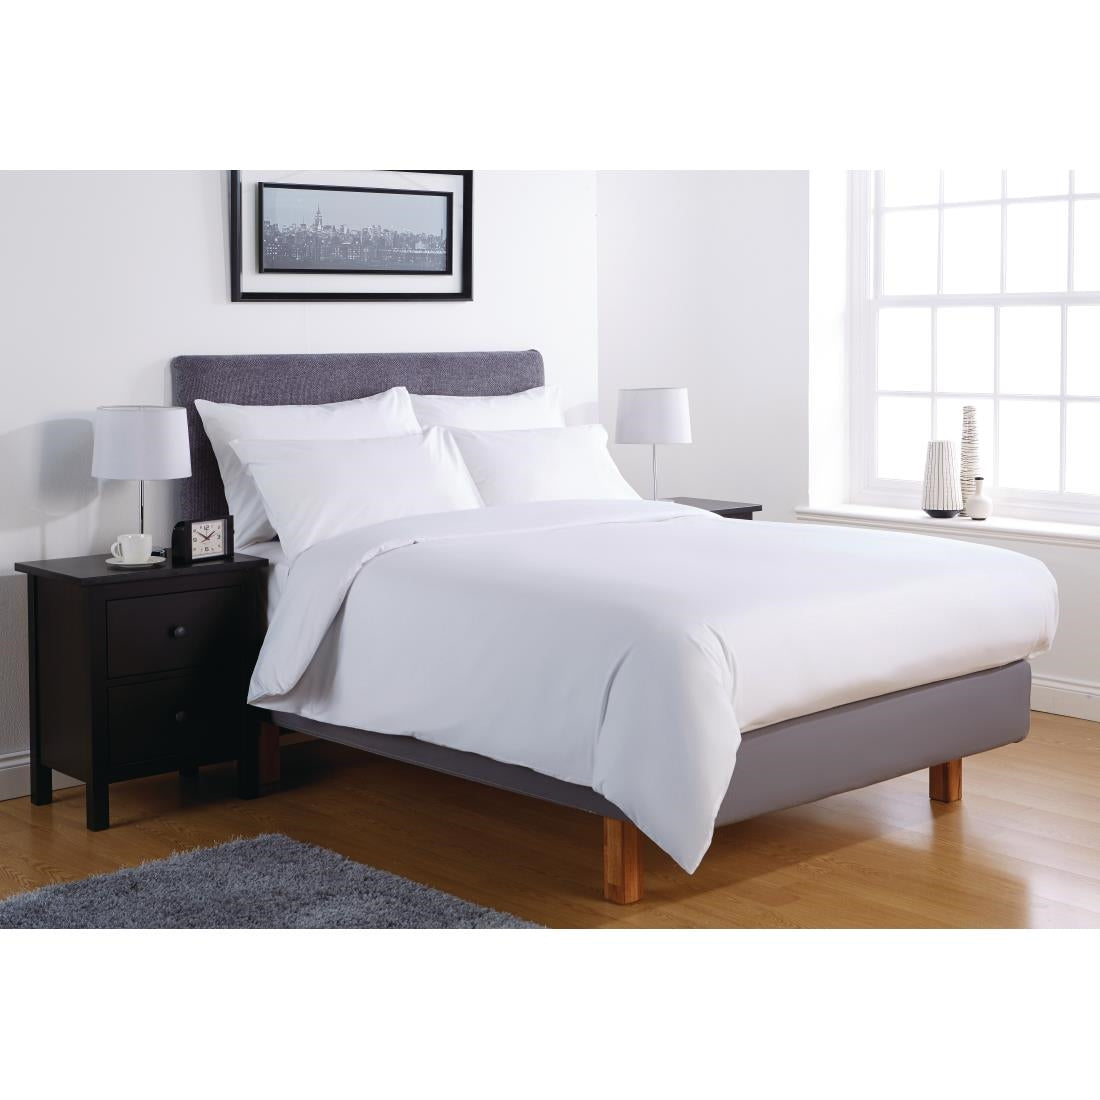 GT801 Mitre Comfort Percale Fitted Sheet White King Size